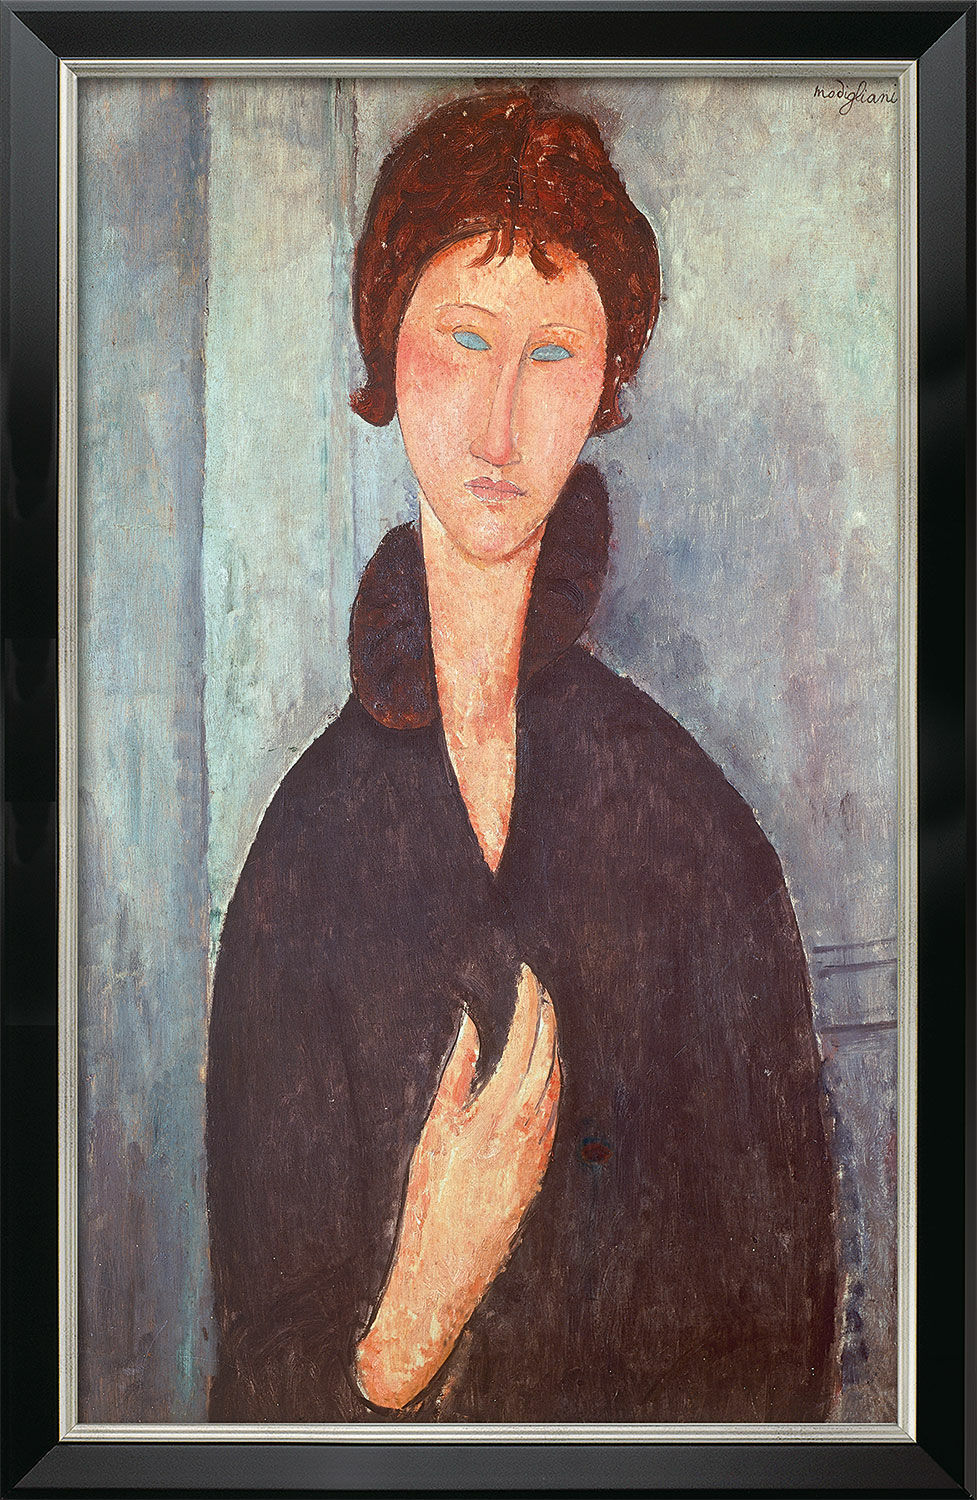 Picture "Woman with Blue Eyes" (1918), black and silver-coloured framed version by Amedeo Modigliani